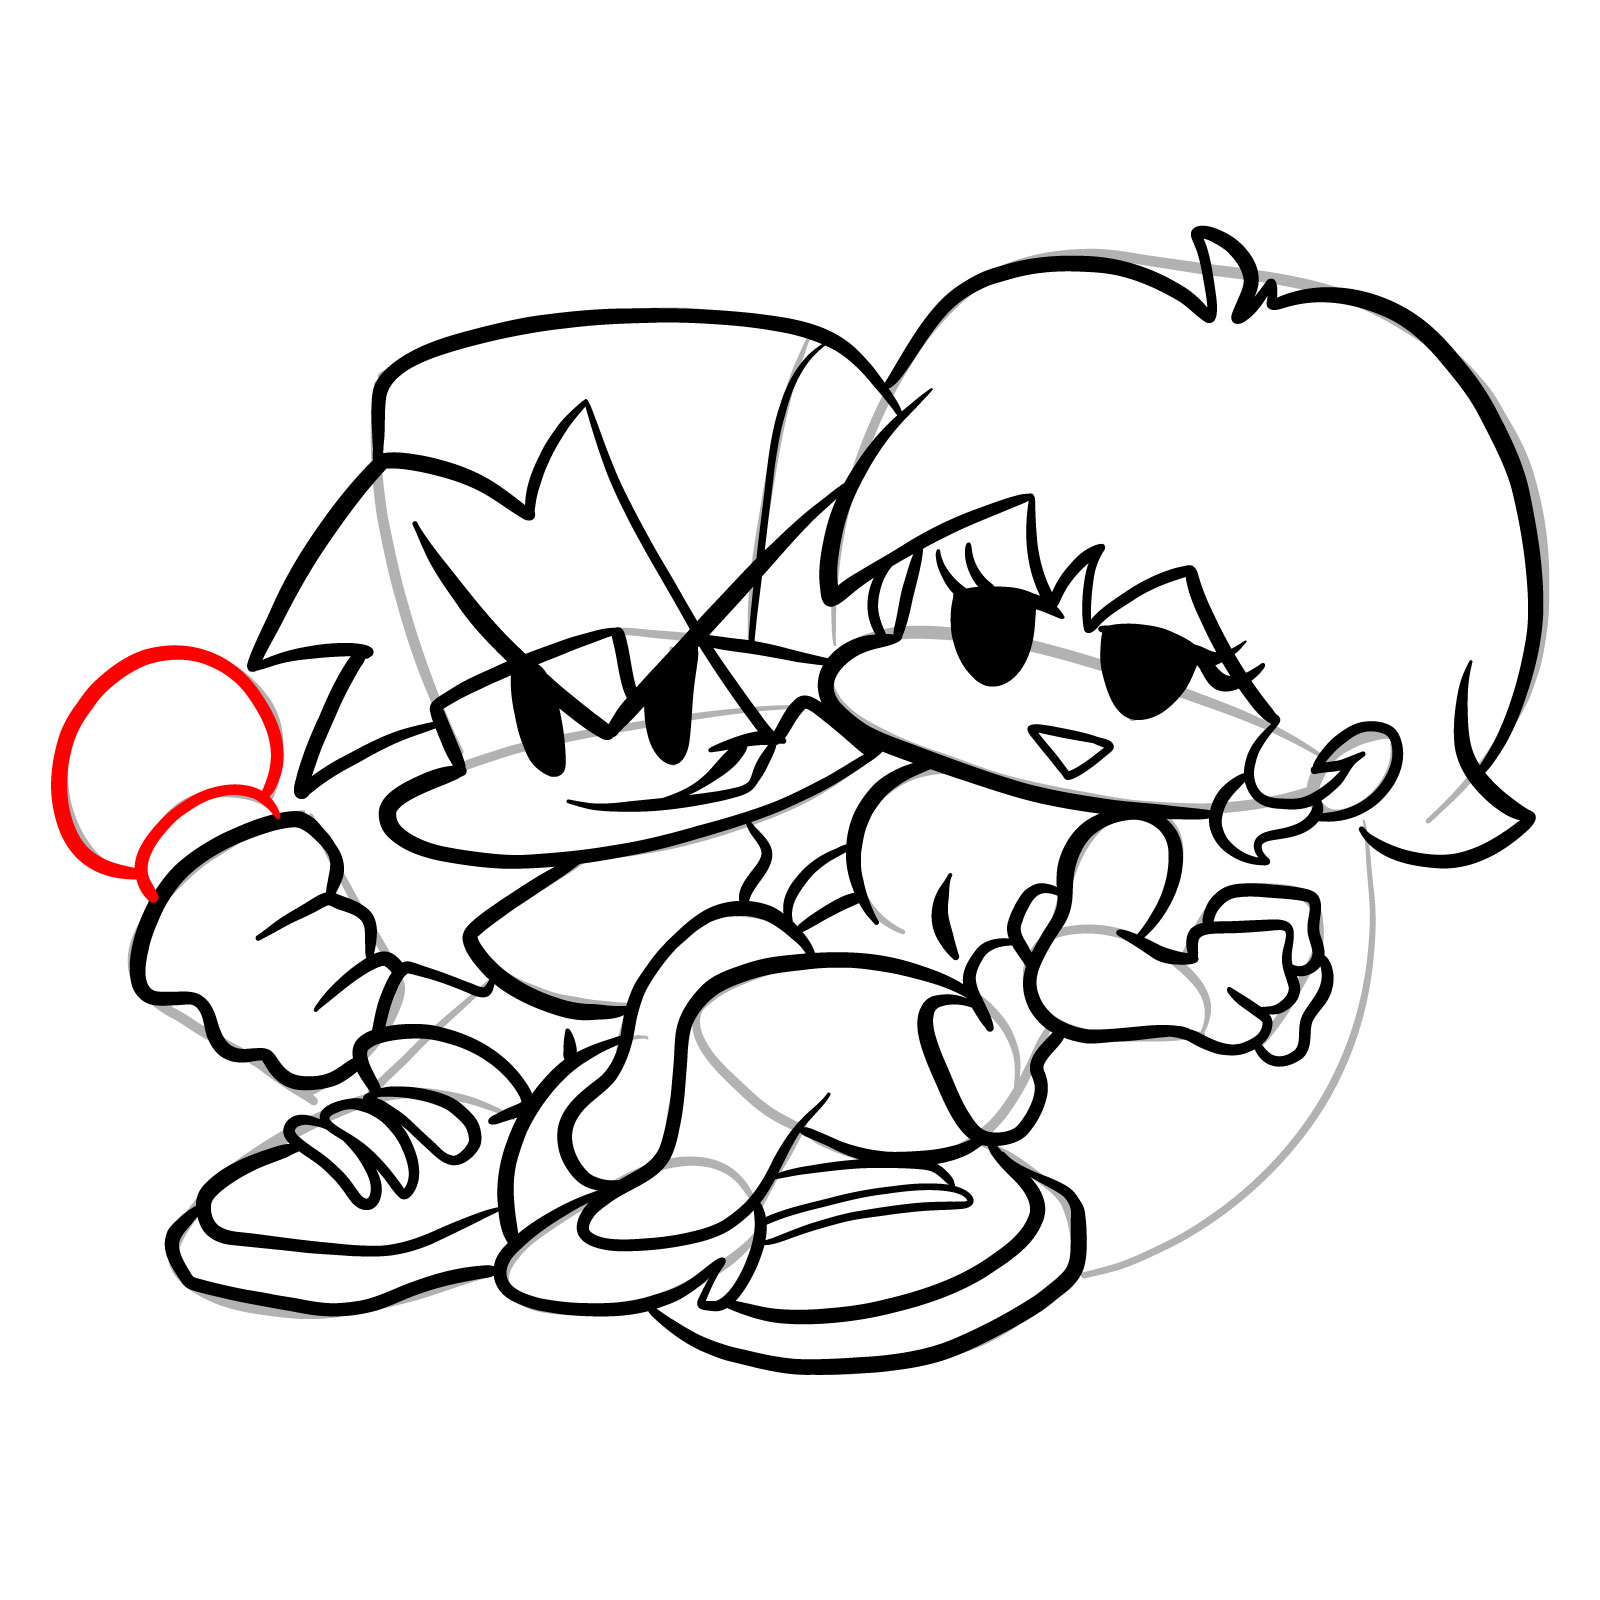 How to draw Bf holding Gf (week 7) - step 29